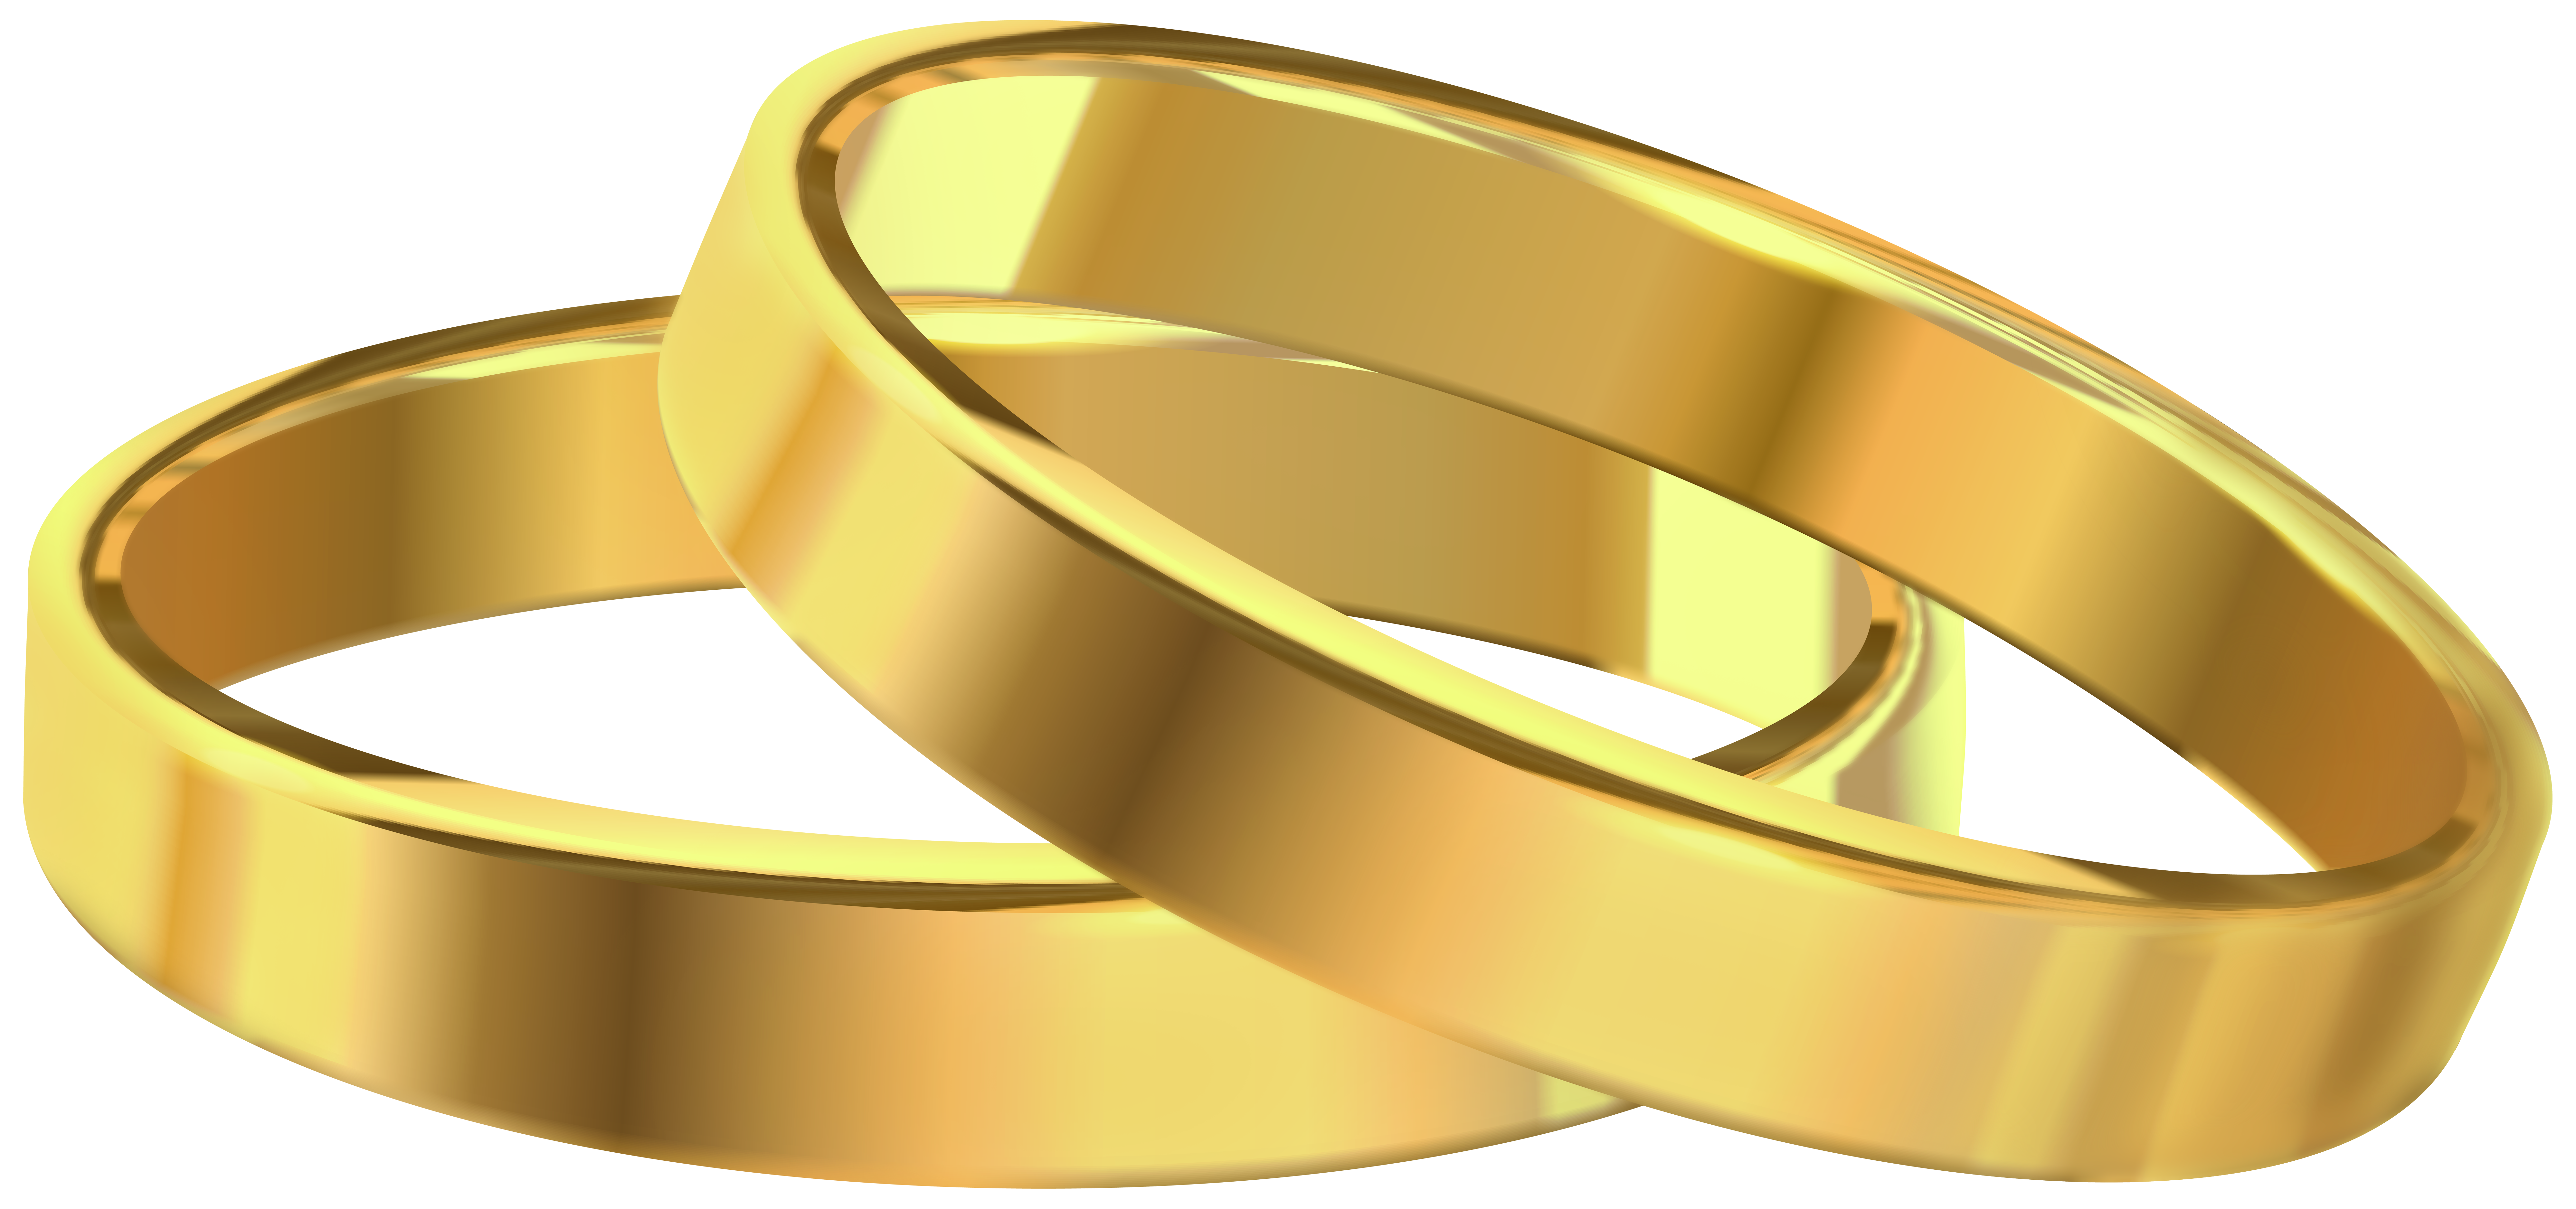 Two gold-colored rings, Wedding ring Engagement ring, Wedding ring, love,  wedding Anniversary png | PNGEgg